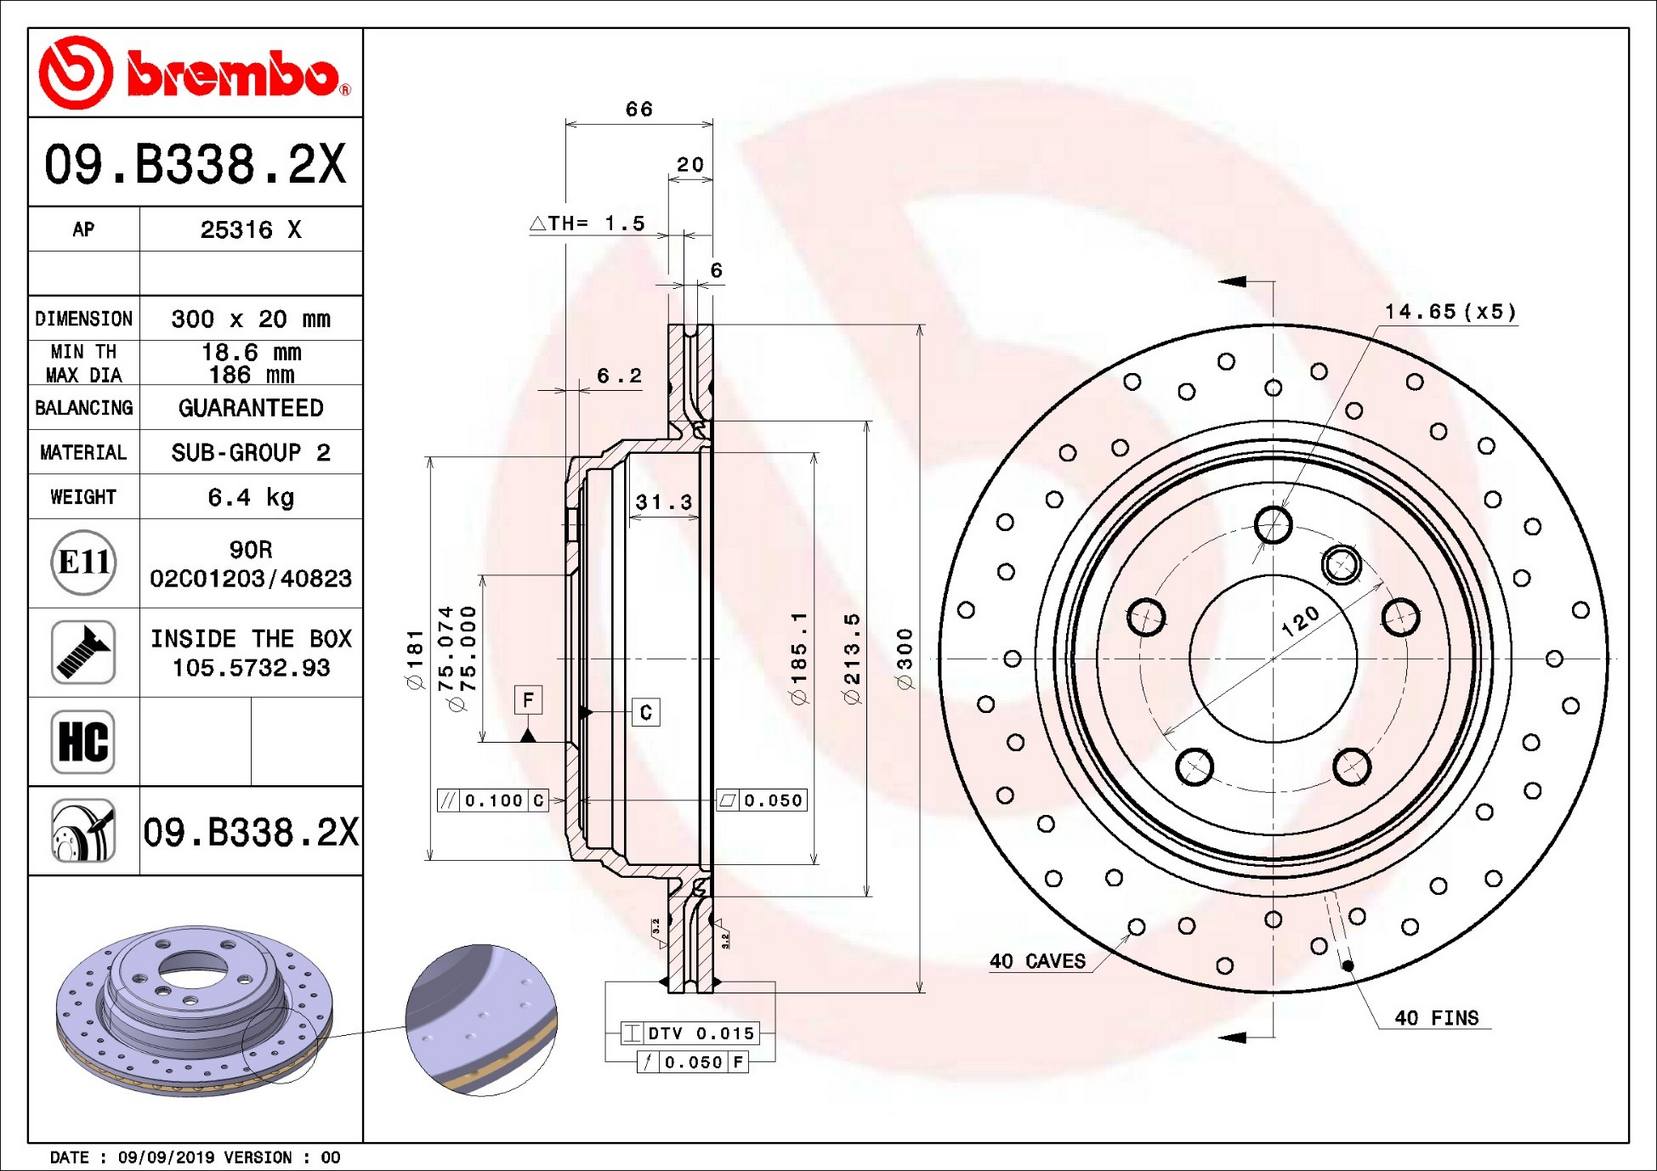 BMW Disc Brake Pad and Rotor Kit - Rear (300mm) (Low-Met) (Xtra) Brembo